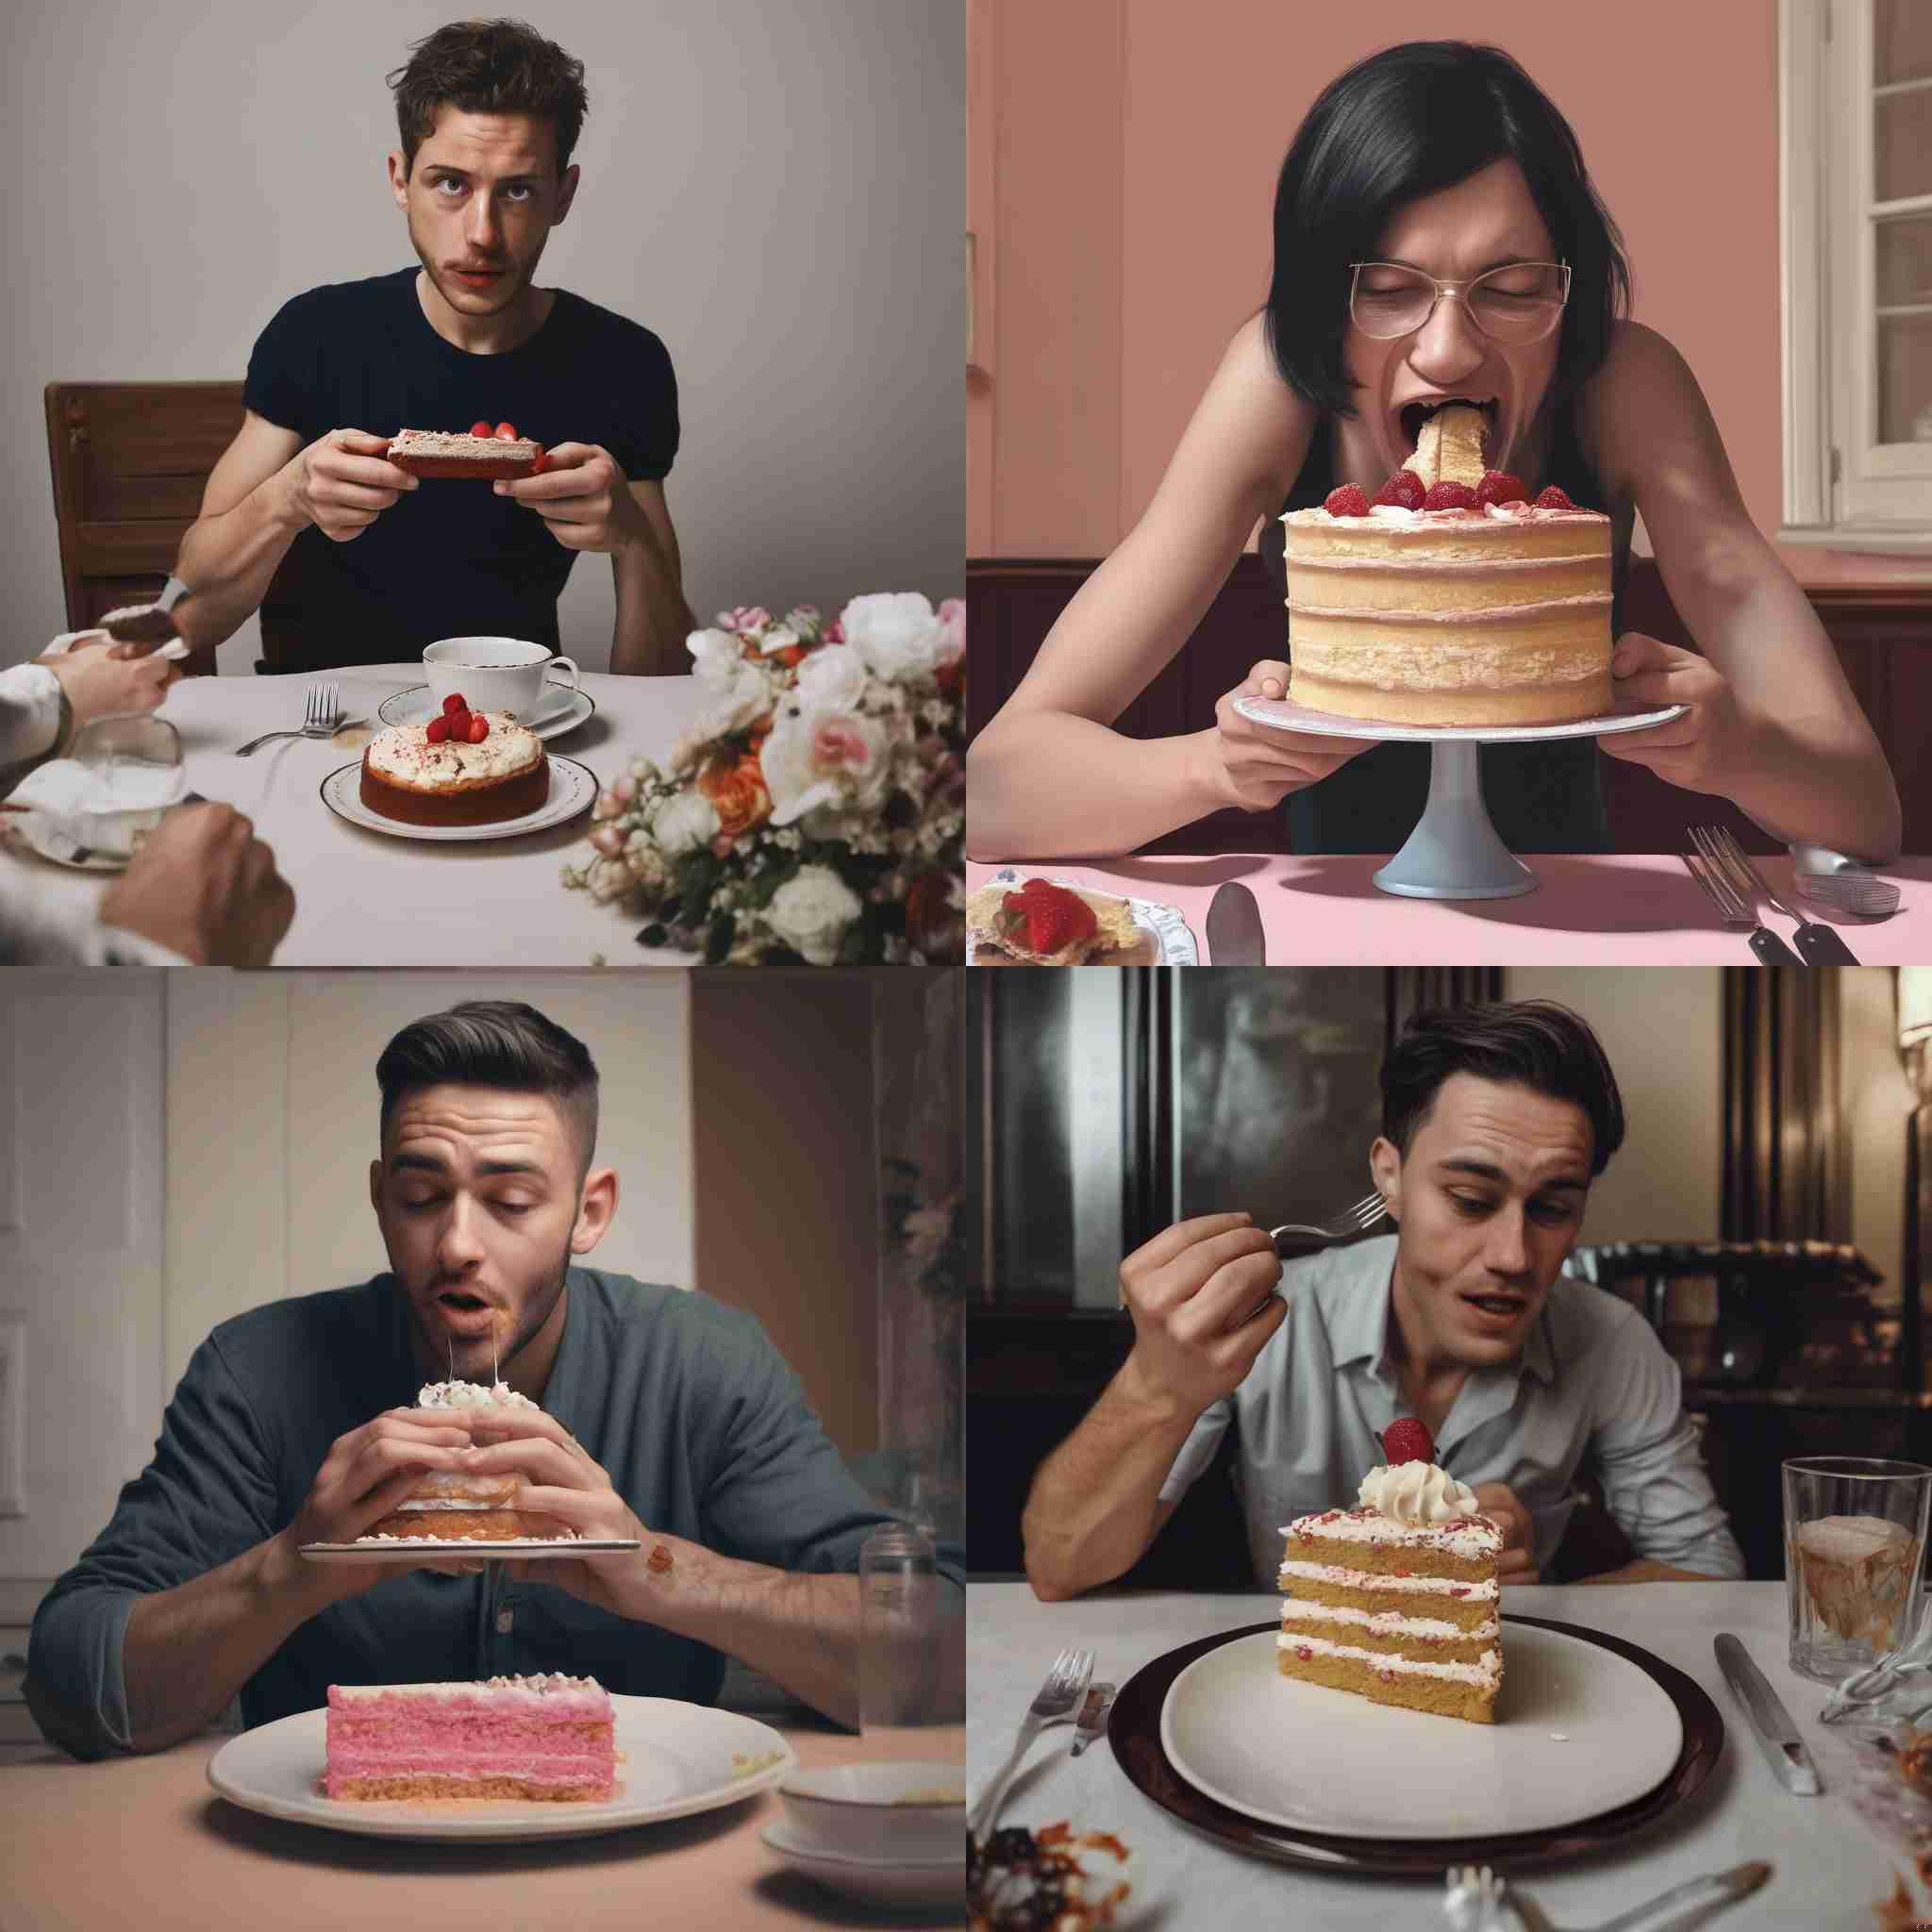 A person eating a cake for a regular dinner